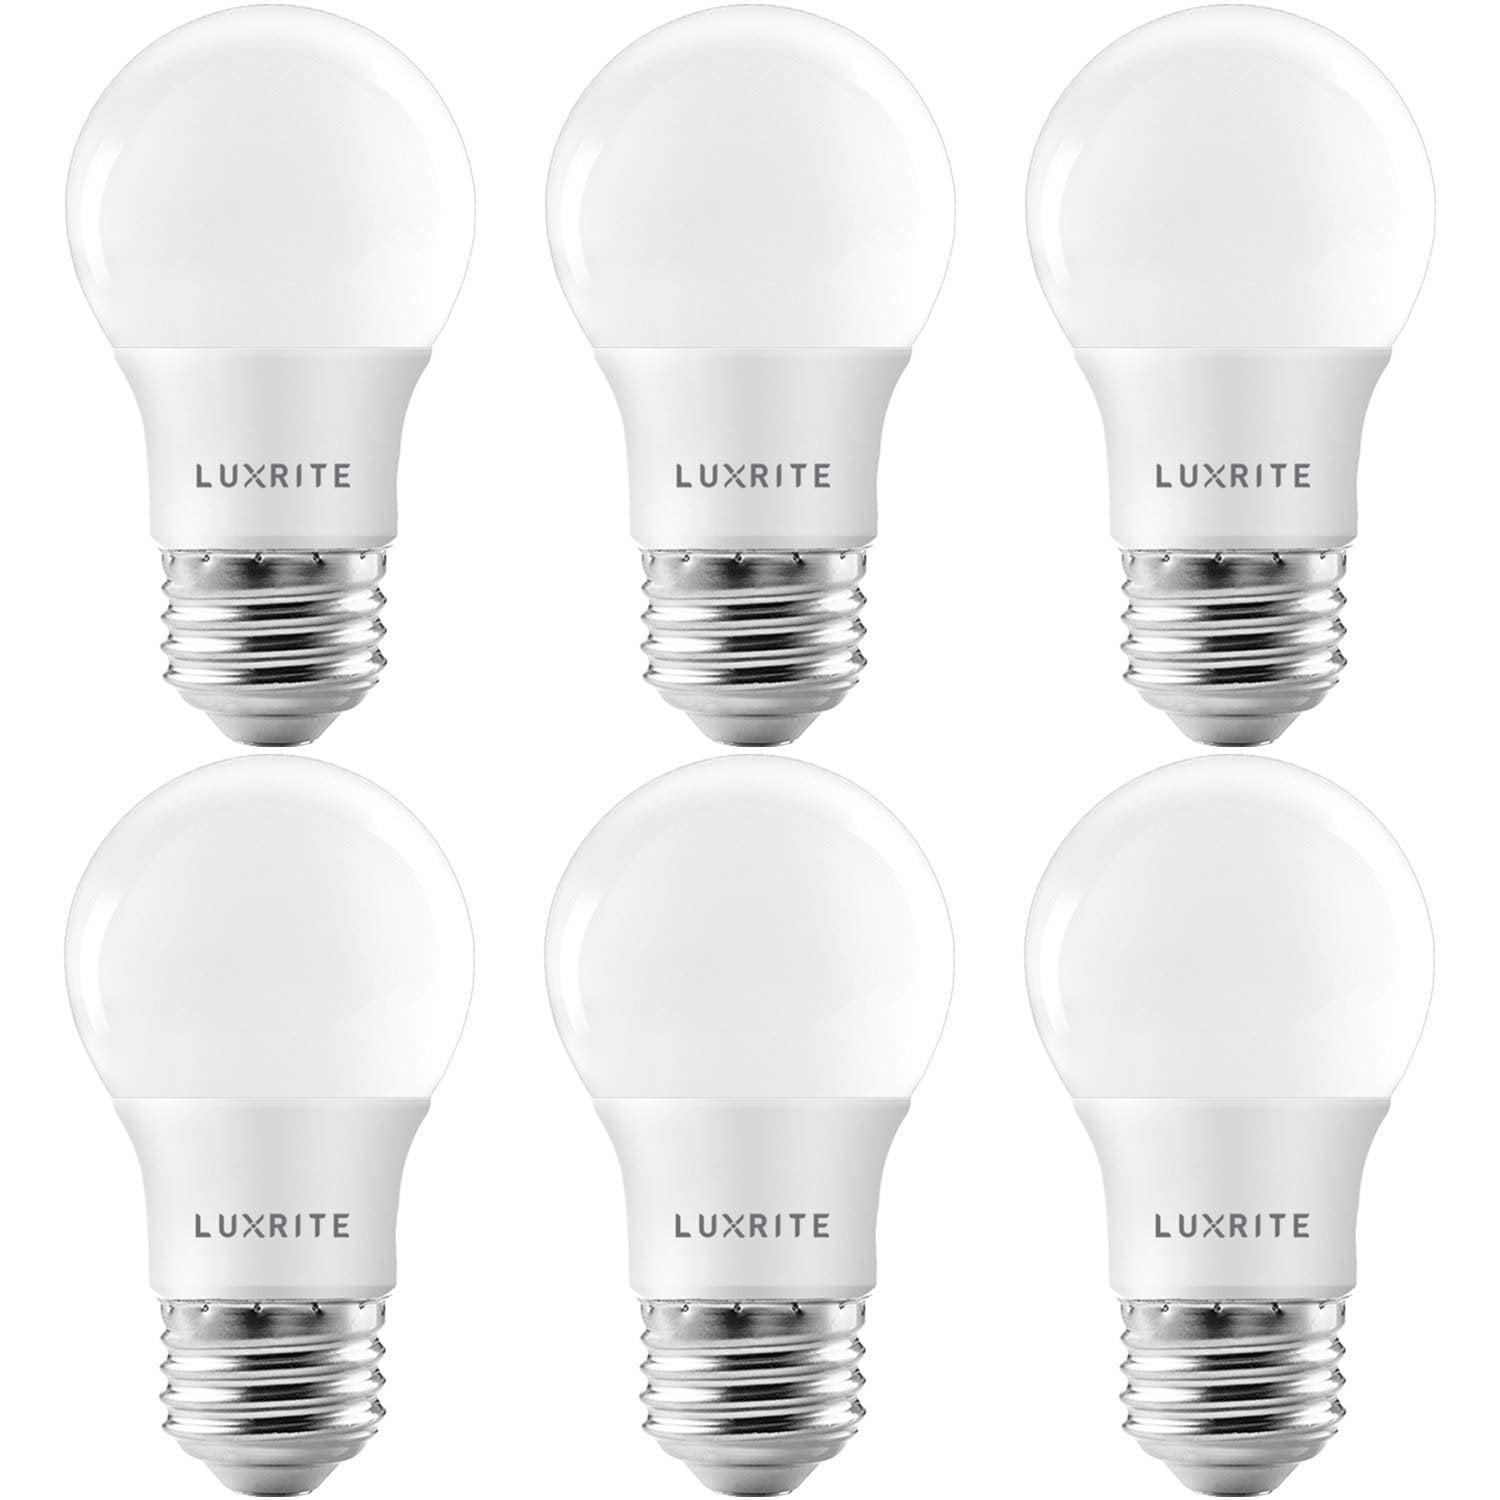 Great for Any Indoor/Outdoor Use Warm White 2700K E26 LED Bulb Dimmable UL Listed 7W Bulb to Replace 60W Incandesent Bulb 6-Pack Luxrite LED Filament Bulb A19 Damp Rated 800 Lumens 